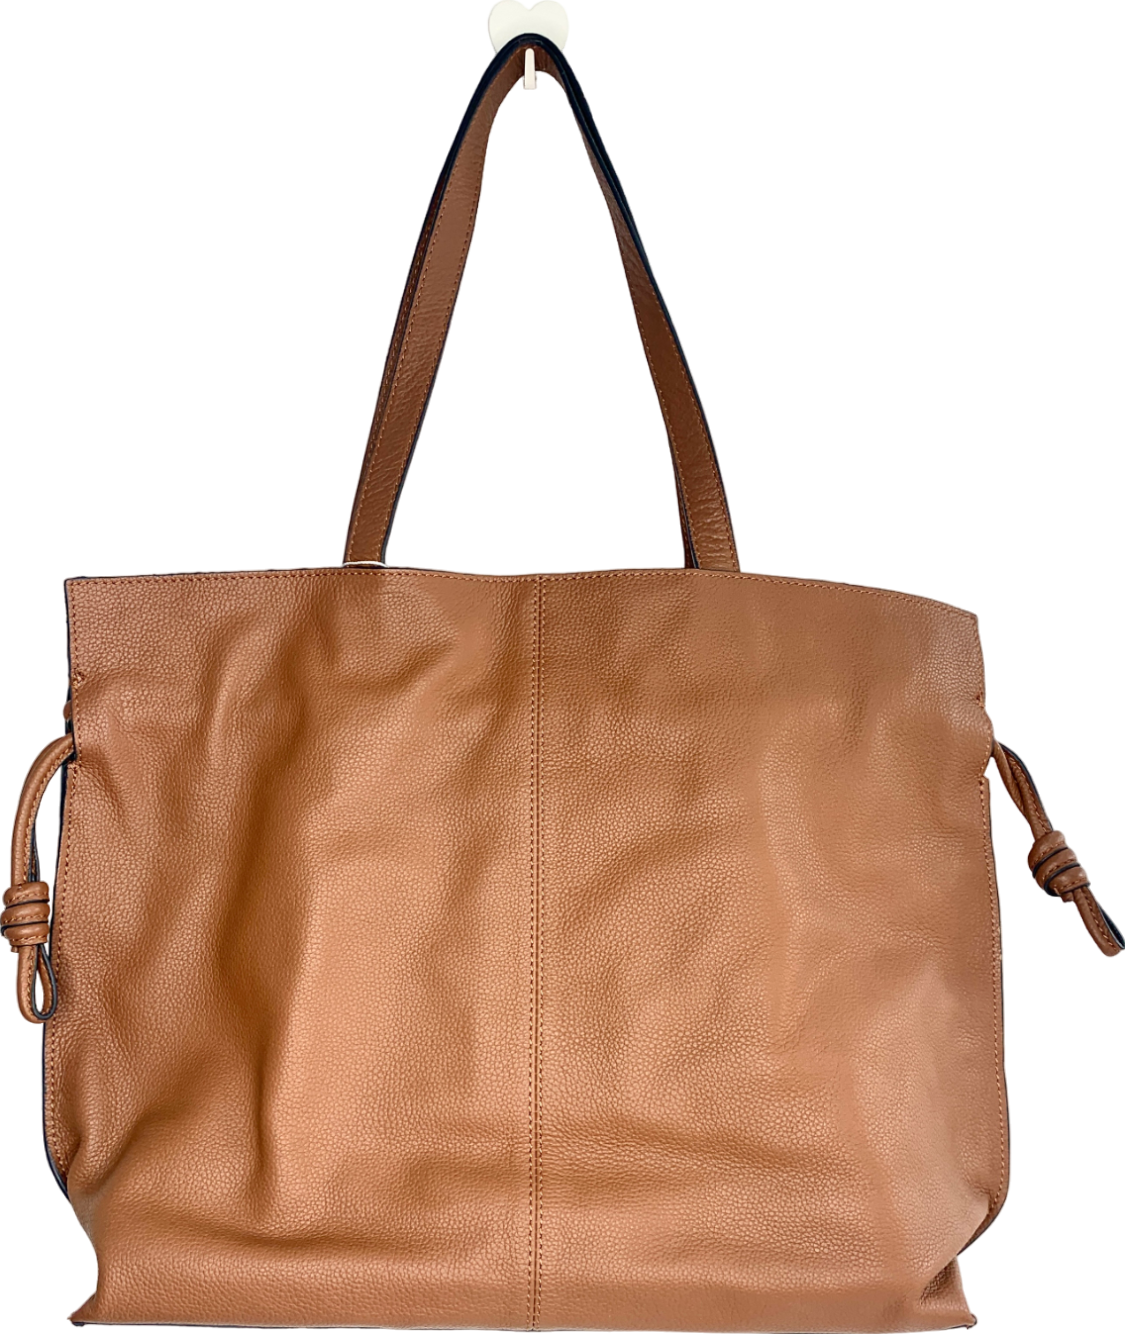 Monsoon Brown Leather Large Tote Bag One Size